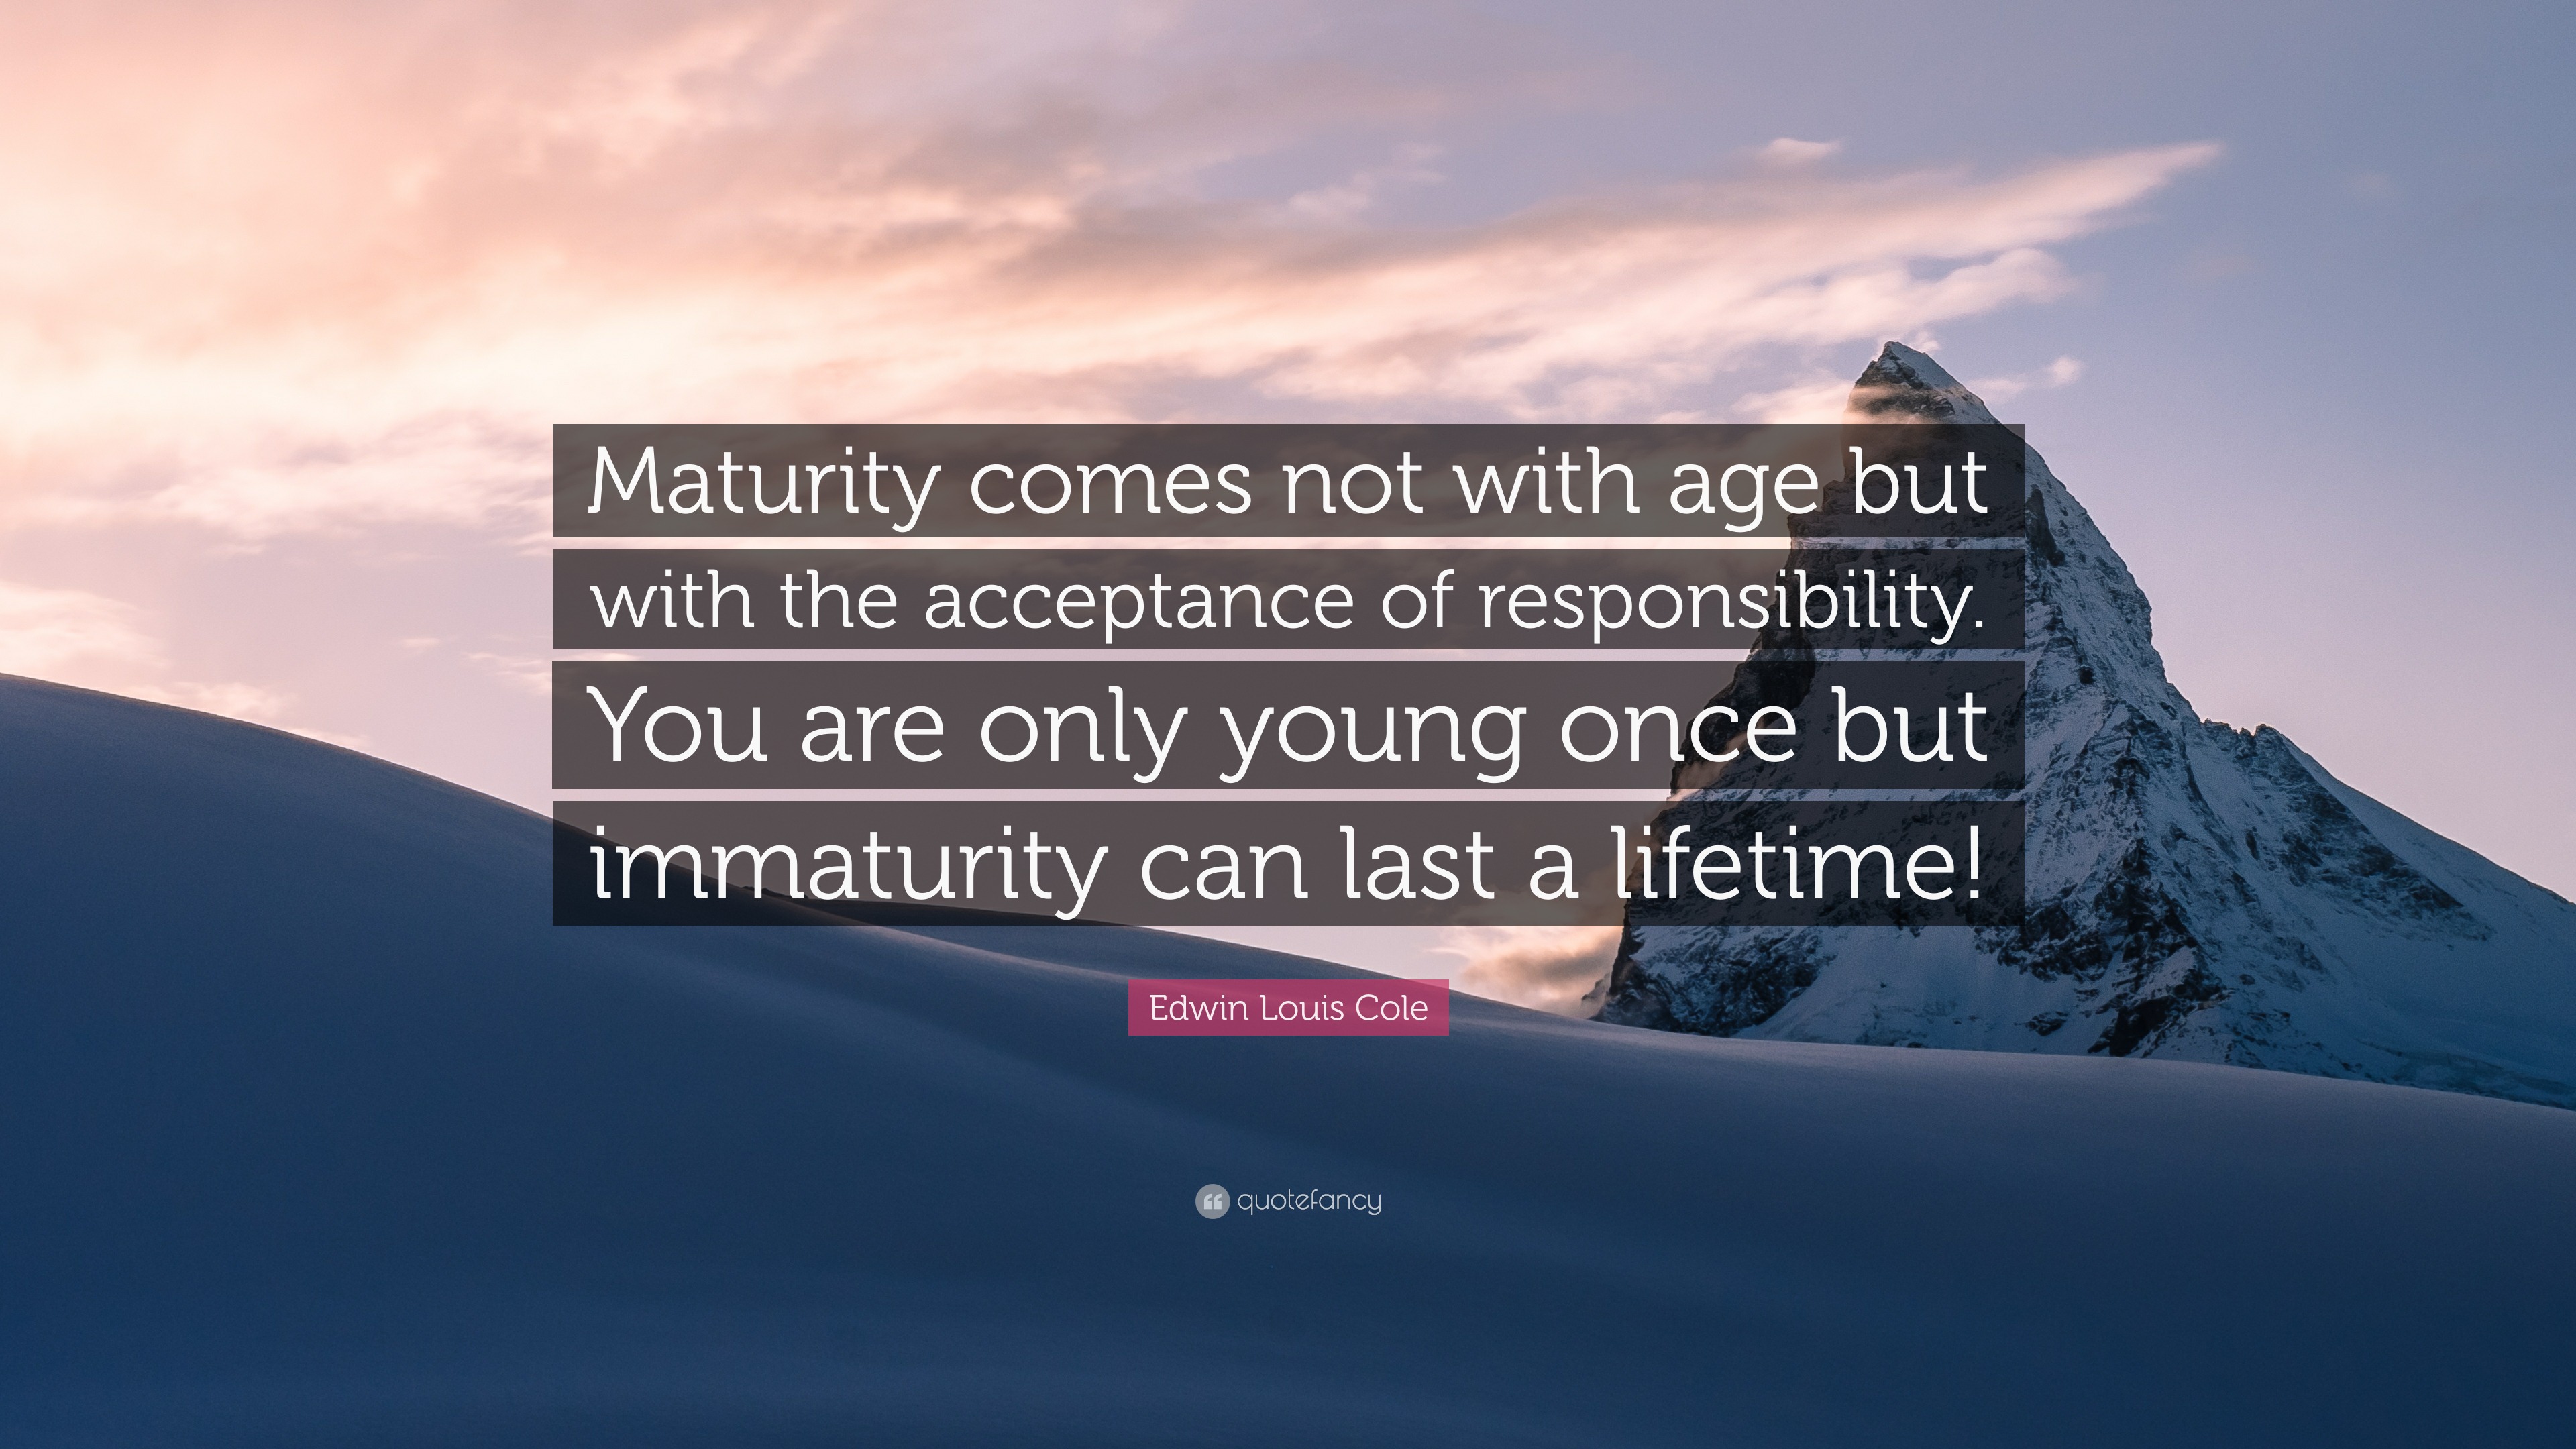 Edwin Louis Cole Quote: "Maturity comes not with age but ...